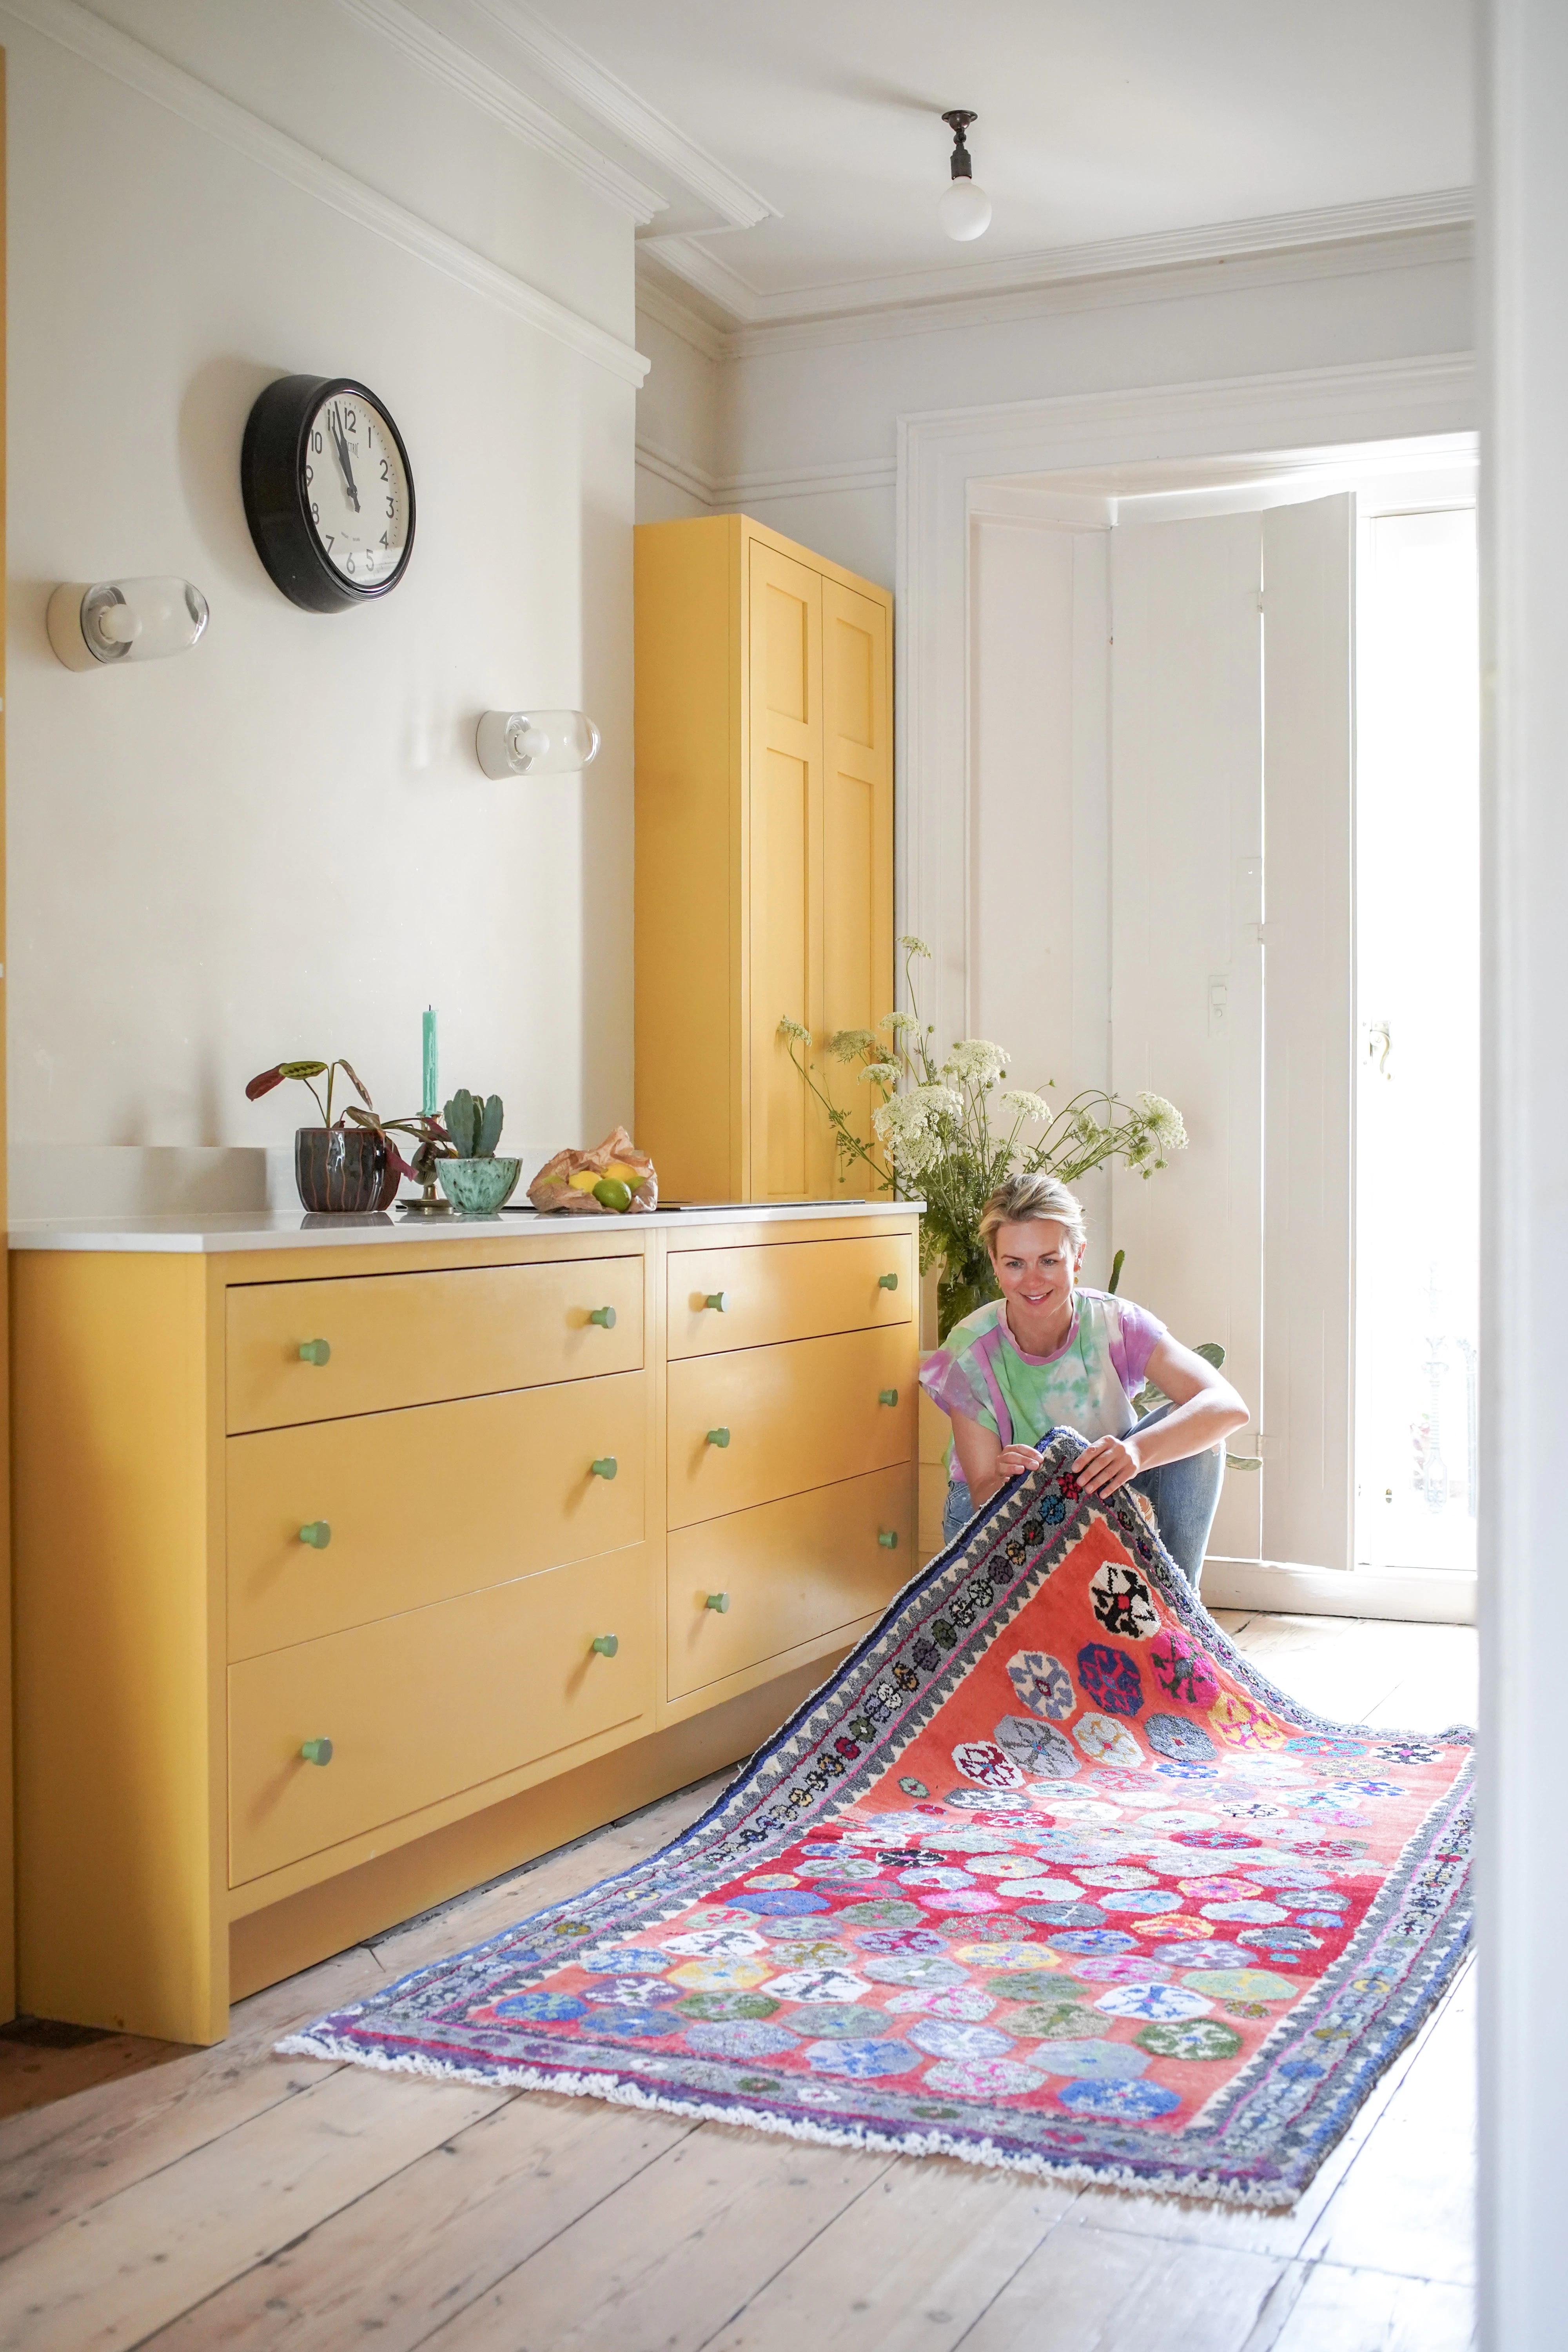 Female founder of UK business in yellow kitchen showing her colourful vintage rug collection